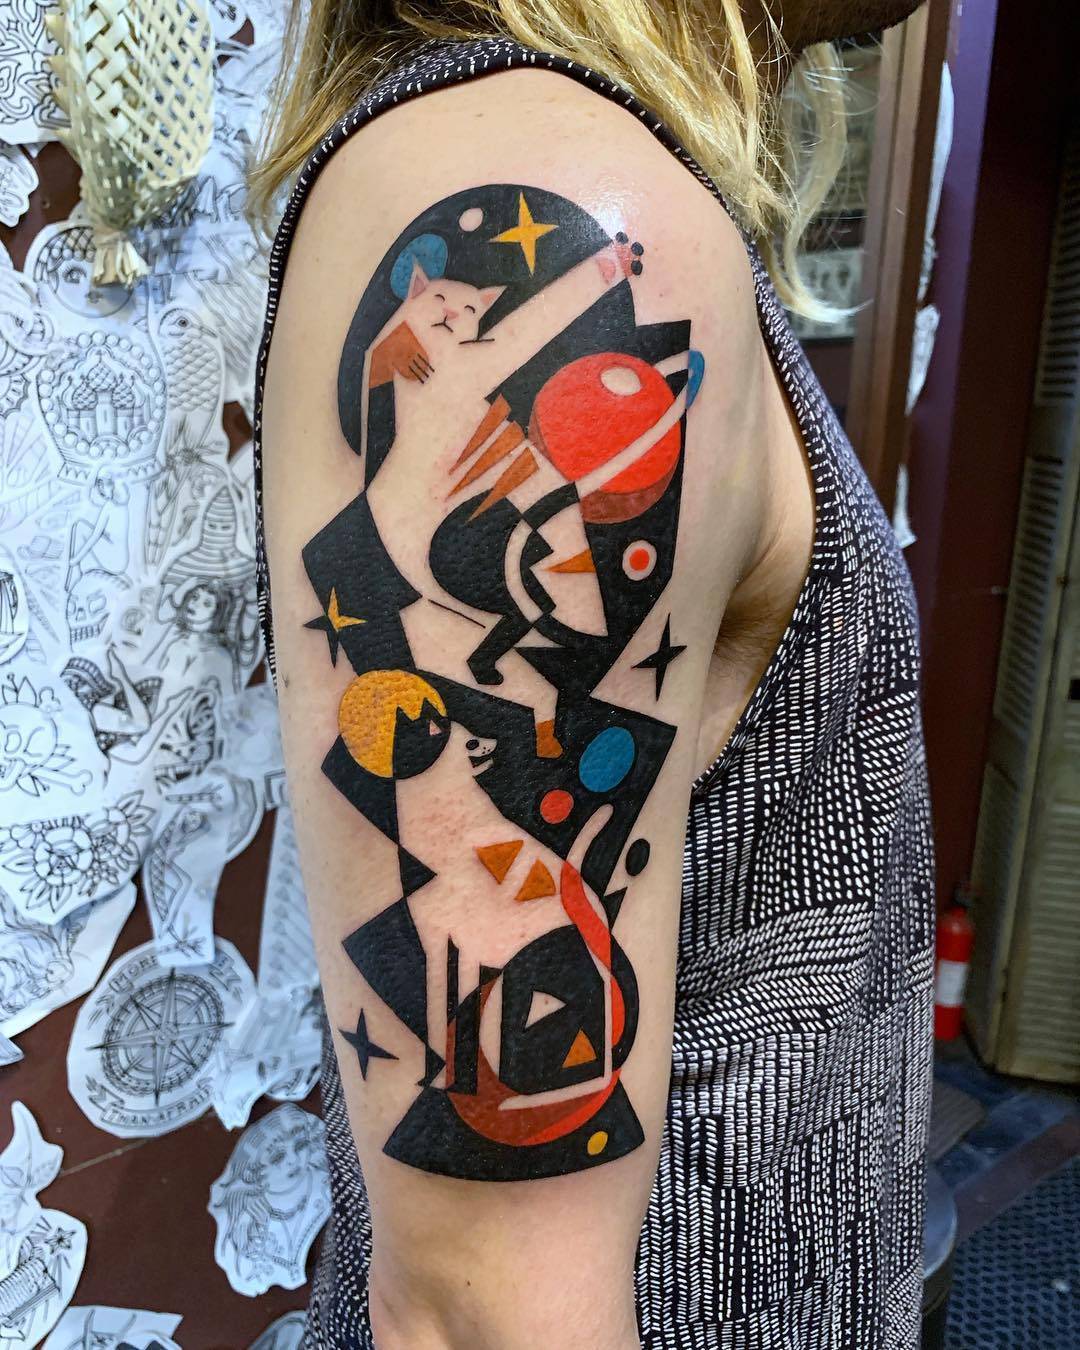 Mike Boyd abstract cubism styled Tattoos bring life to Picasso Art